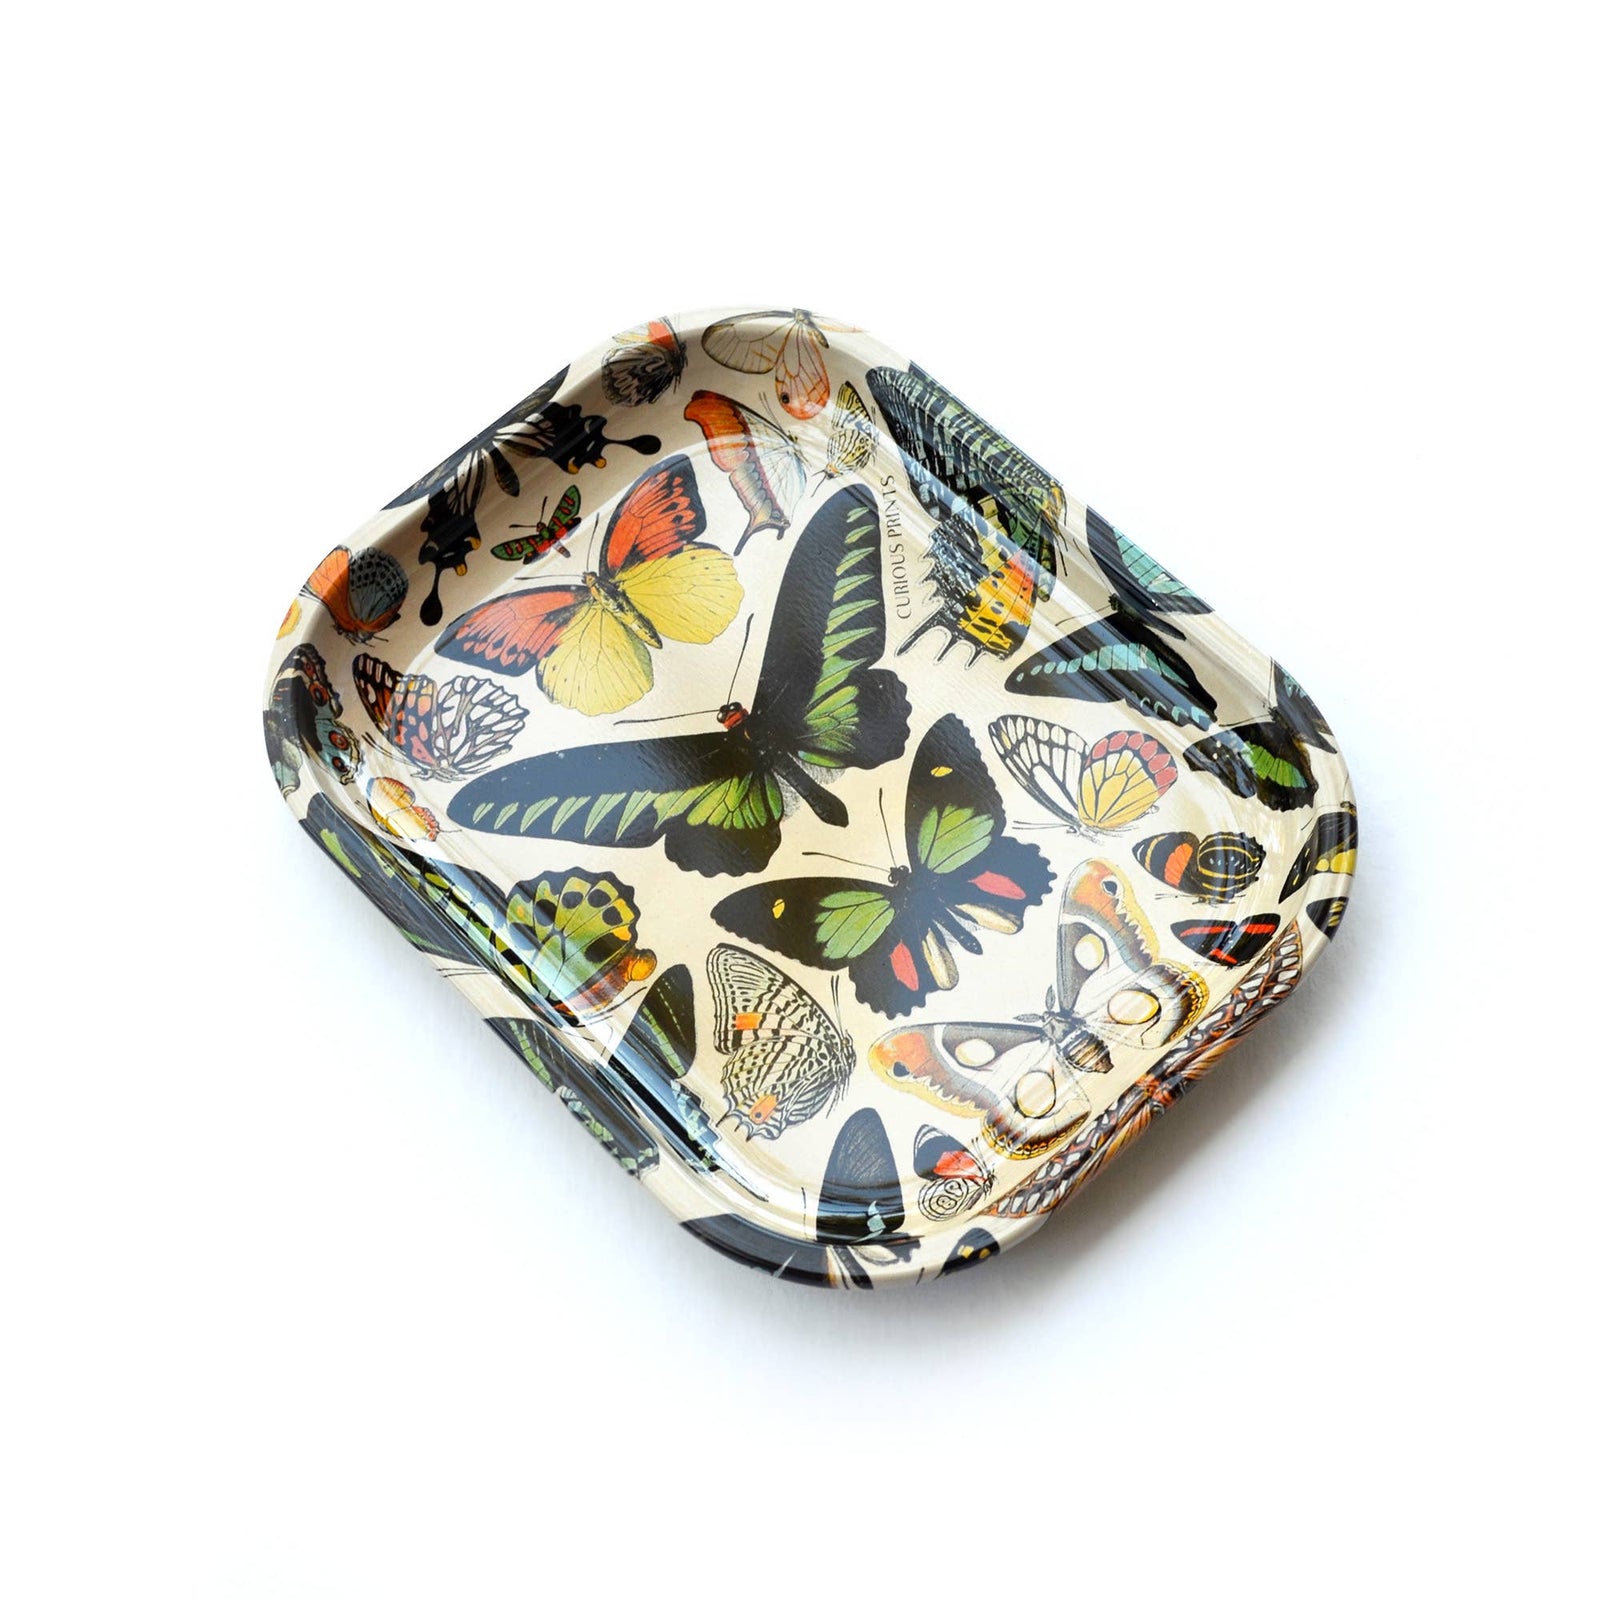 Small Metal Butterfly Tray | Vintage Butterflies Print Catch-all Rolling Tray | 5"x7"